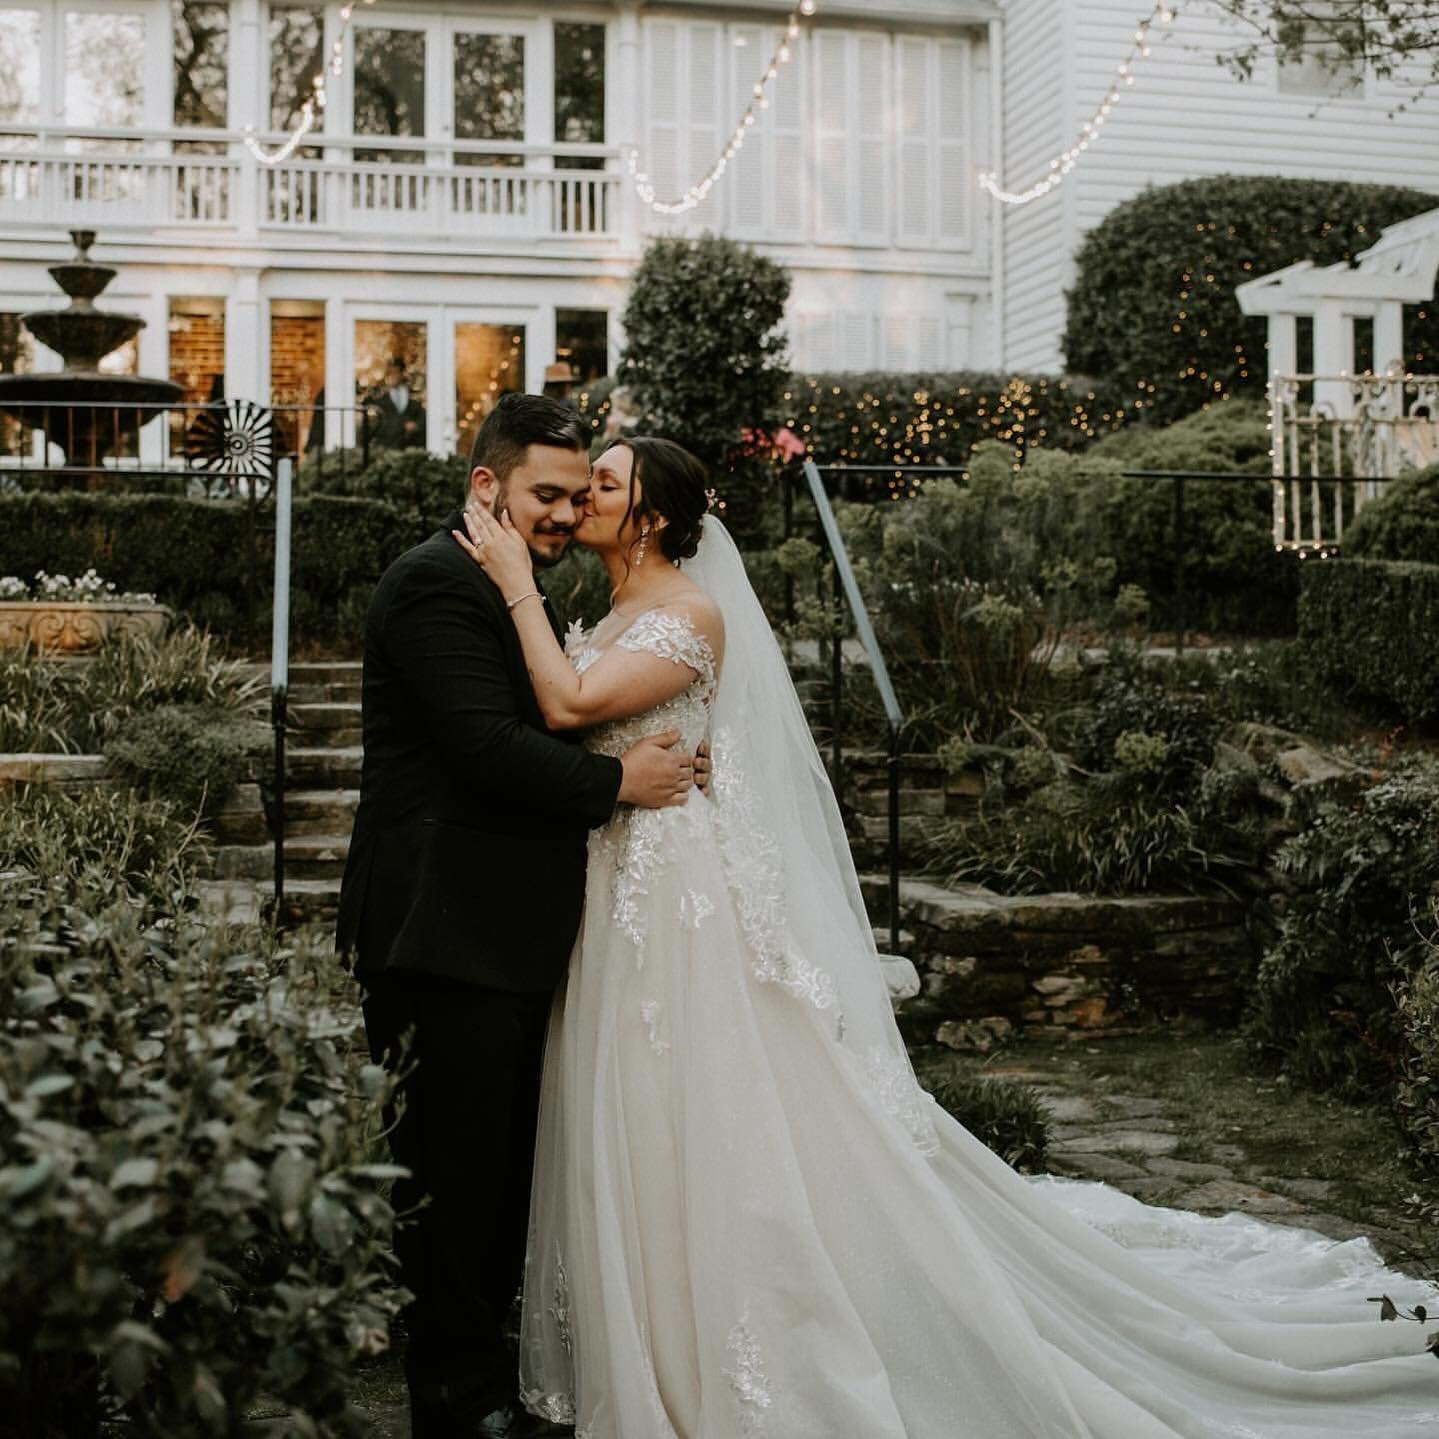 Are you kidding with how gorgeous and romantic this is?
Click the link in our profile to schedule your tour of Primrose Cottage and all its stunning spaces.

Photo: @yazidavis
Venue: @primrose_cottage_weddings
Catering + Service: @a_divine_event
Flor